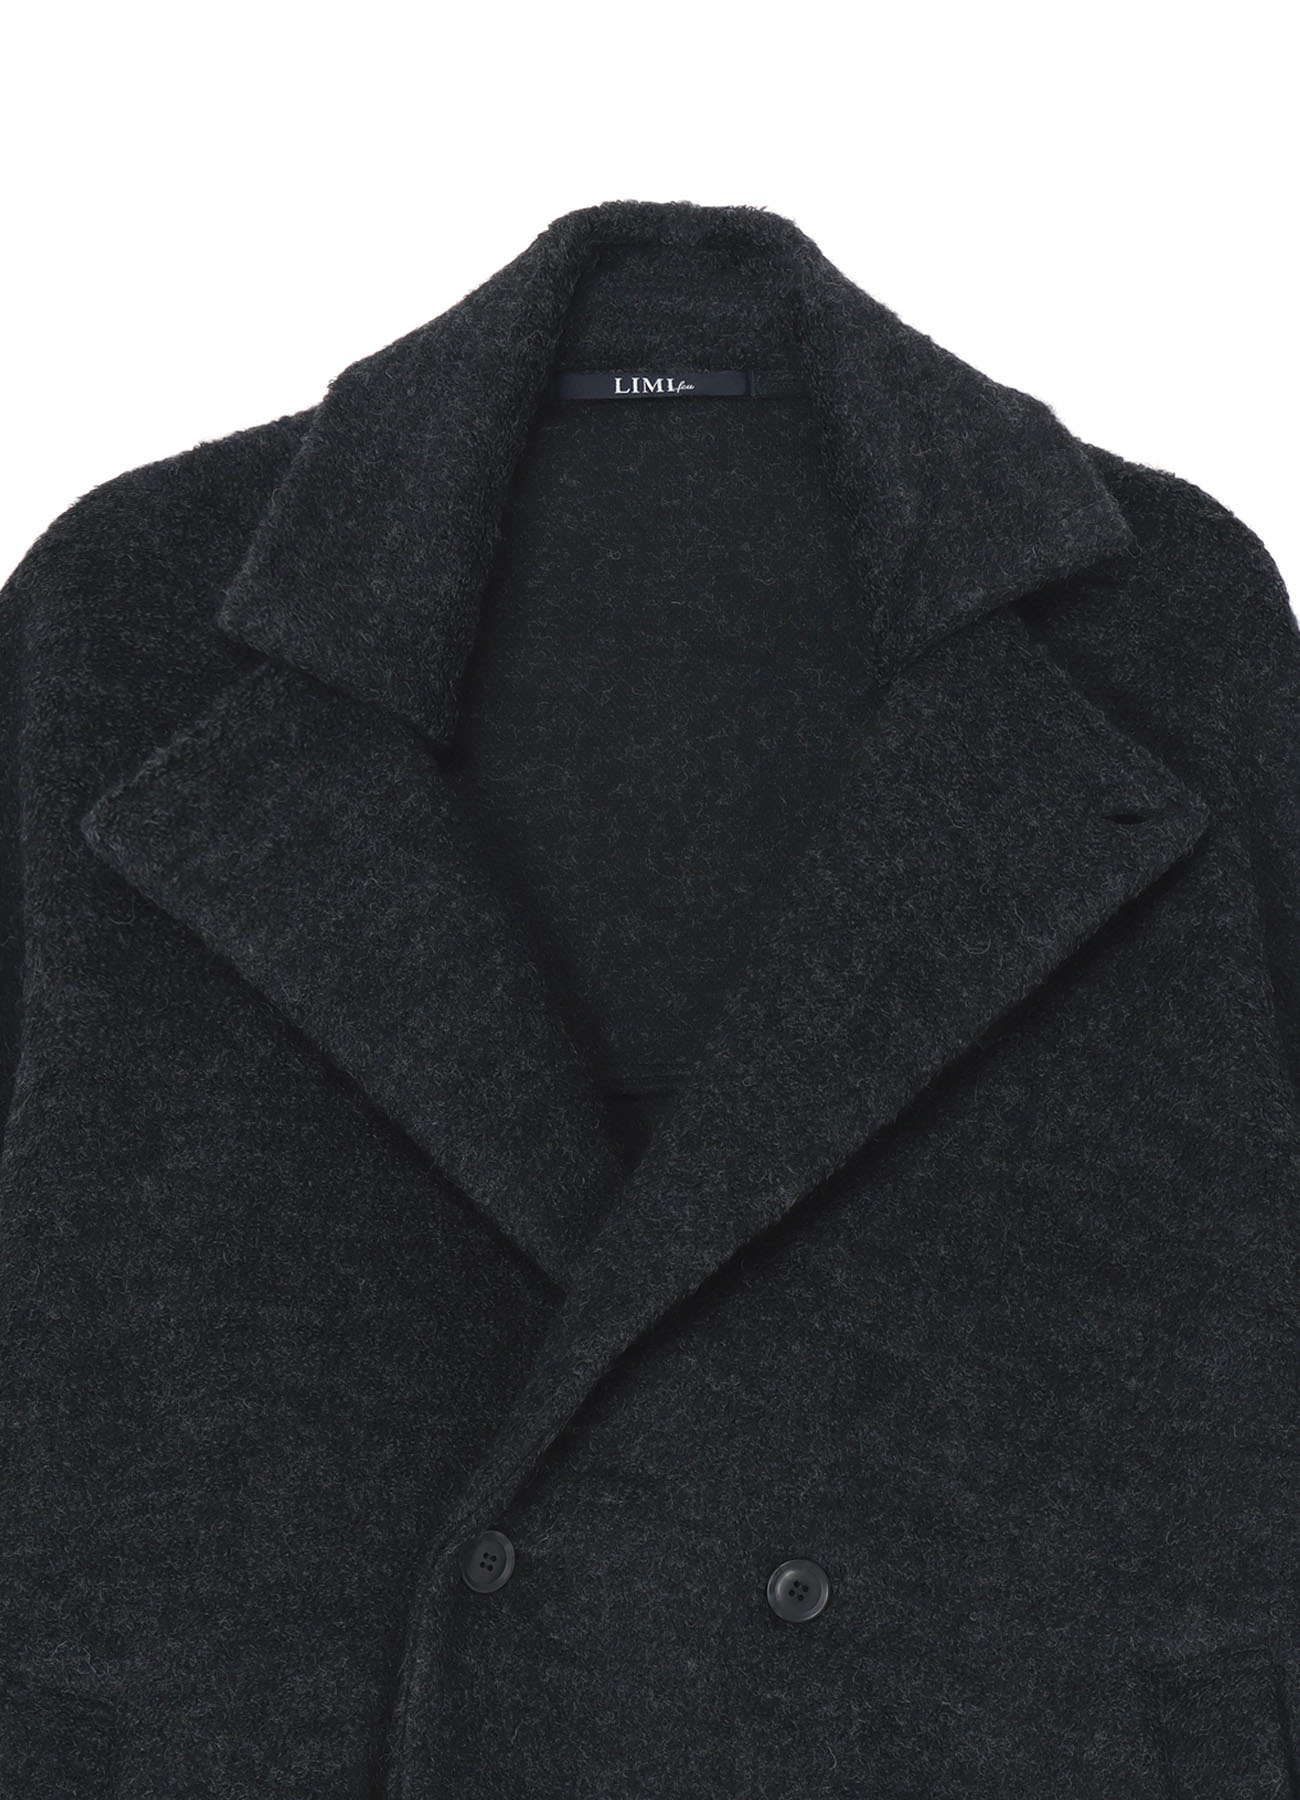 SHEEP PILE JACKET WITH DOUBLE FRONT BUTTON(S Charcoal): LIMI feu ...